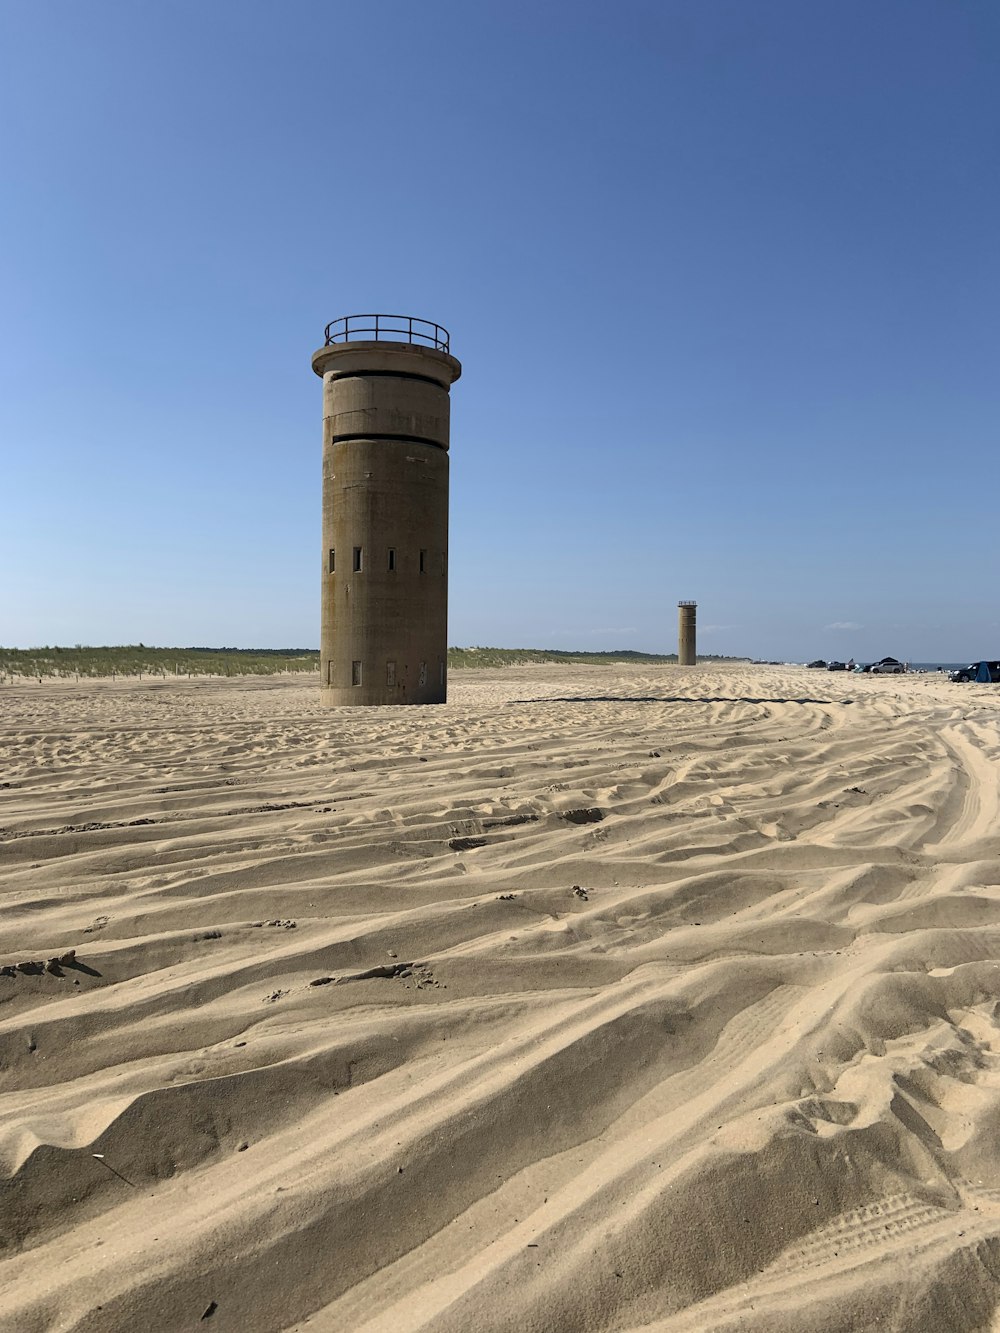 brown concrete tower on brown sand under blue sky during daytime